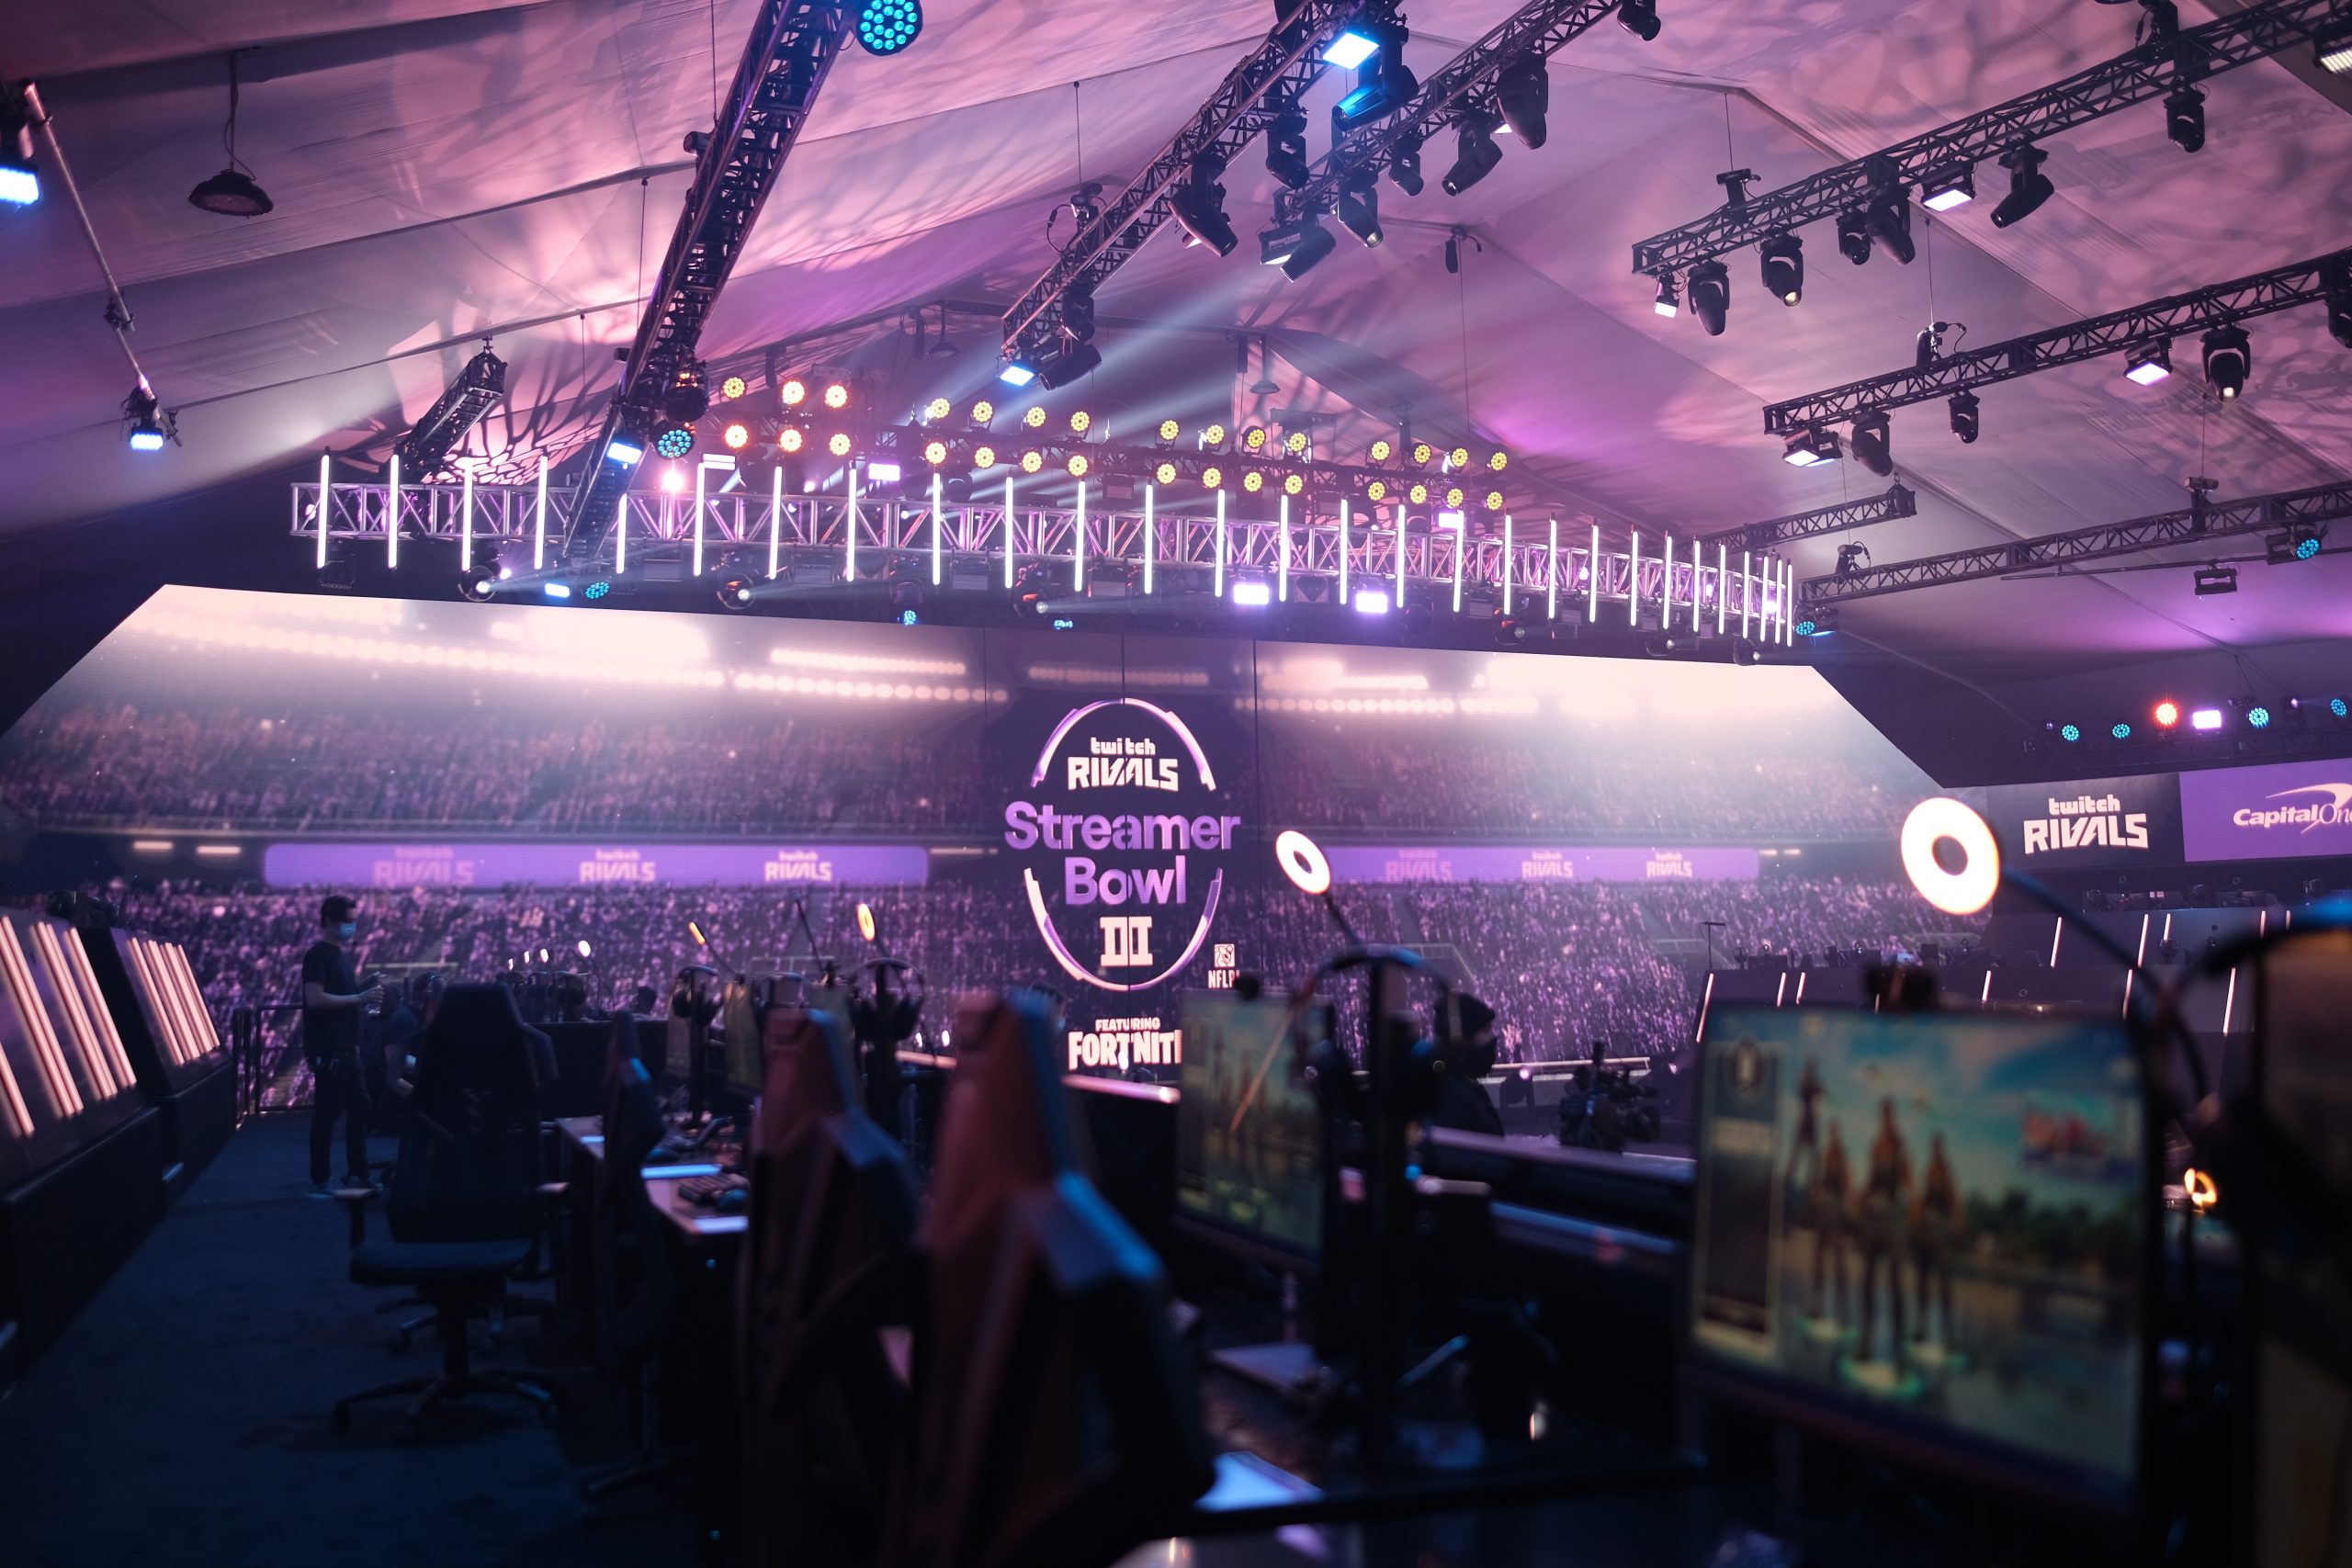 Twitch Rivals Streamer Bowl III Returns to Onsite Production, Debuts